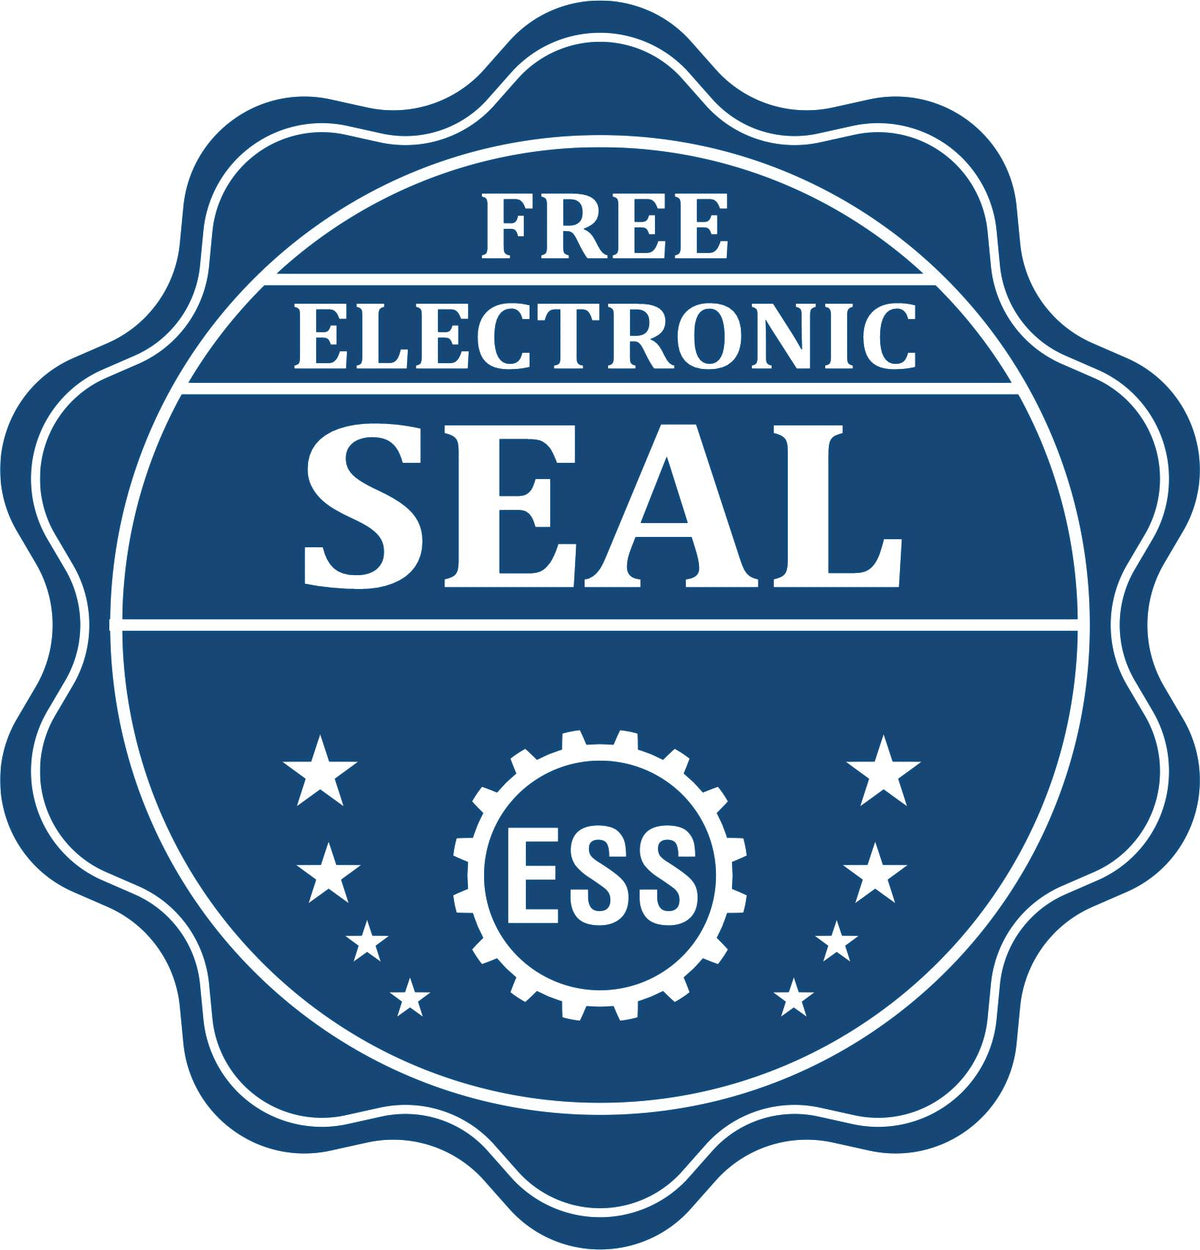 A badge showing a free electronic seal for the Long Reach Kansas Geology Seal with stars and the ESS gear on the emblem.